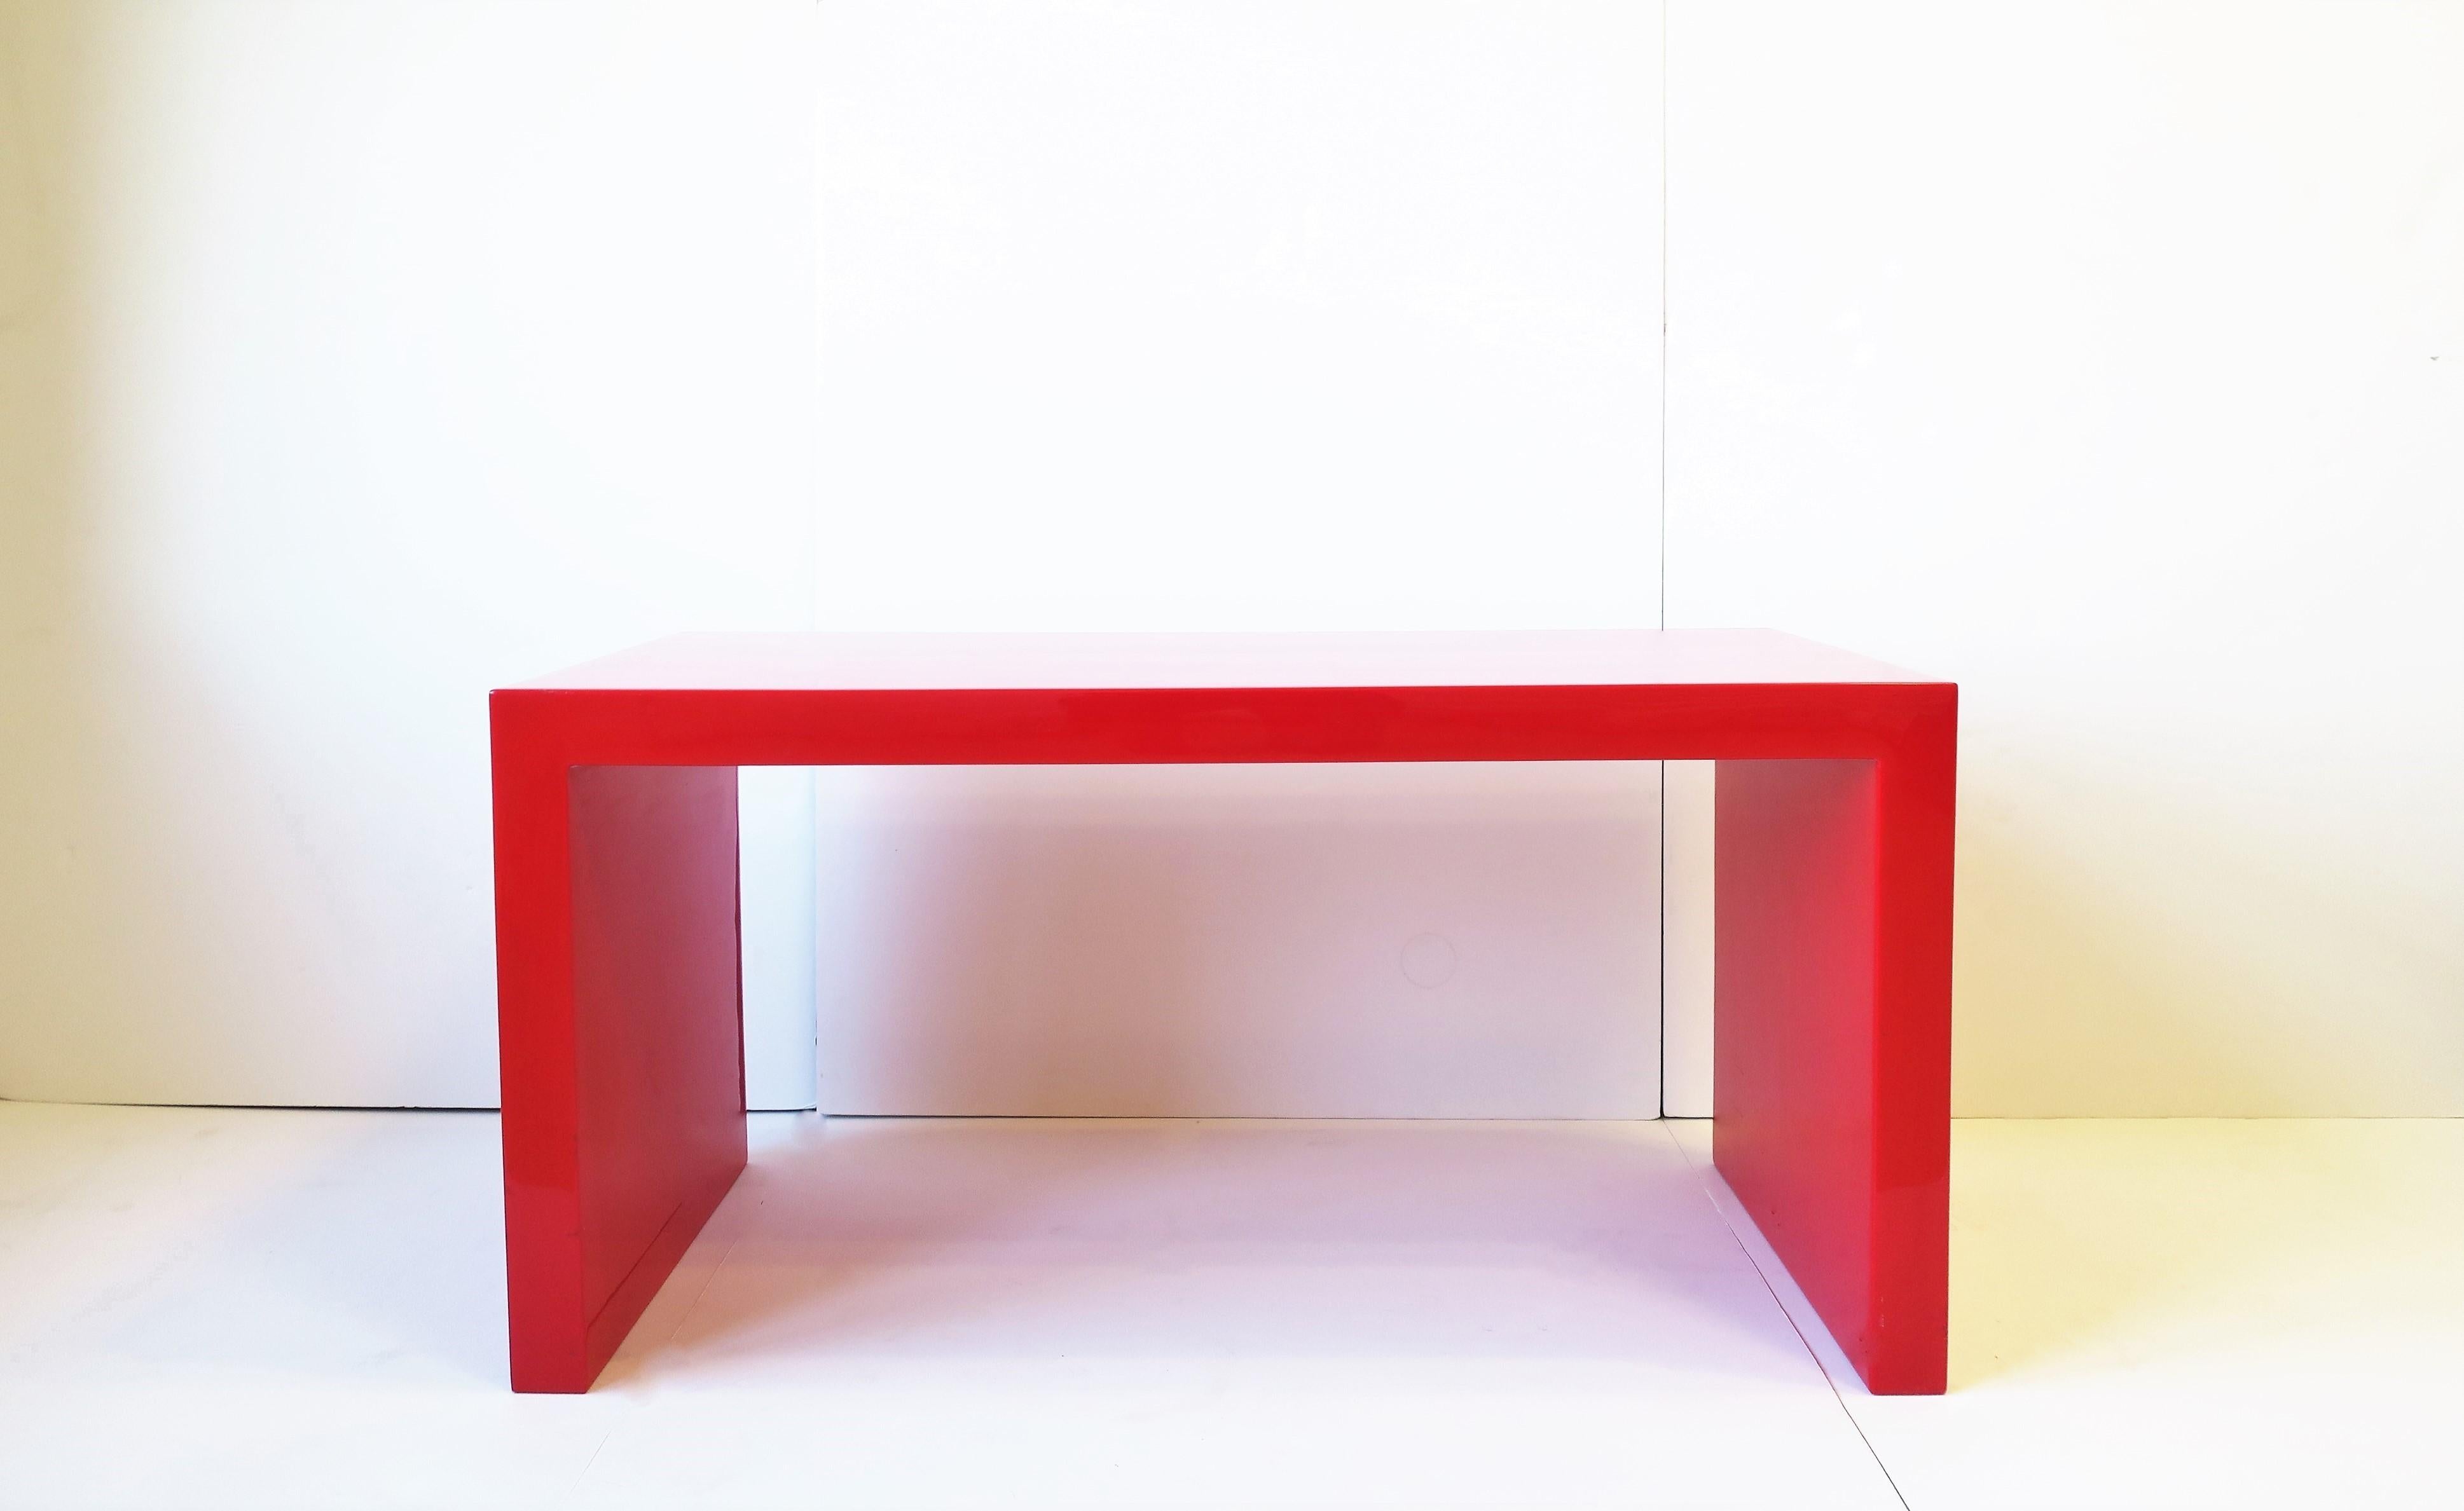 A beautiful and substantial high-gloss red opaque acrylic bench or cocktail table, in the Modern style or Postmodern period, circa late-20th to early 21st-century. Great as a bench or coffee/cocktail table. Dimensions: 18